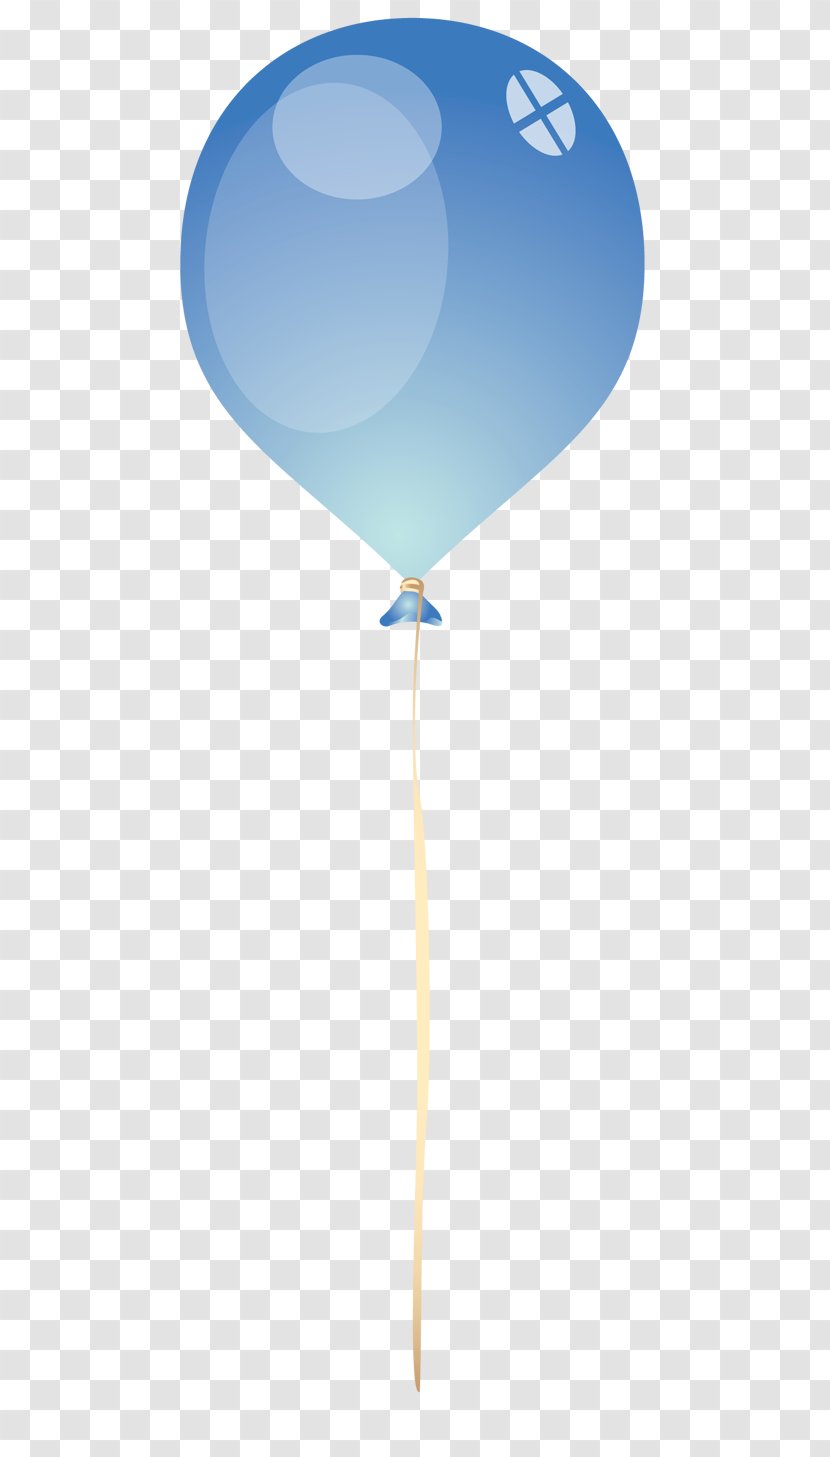 Toy Balloon Photography Clip Art - Holiday - Balloons Transparent PNG